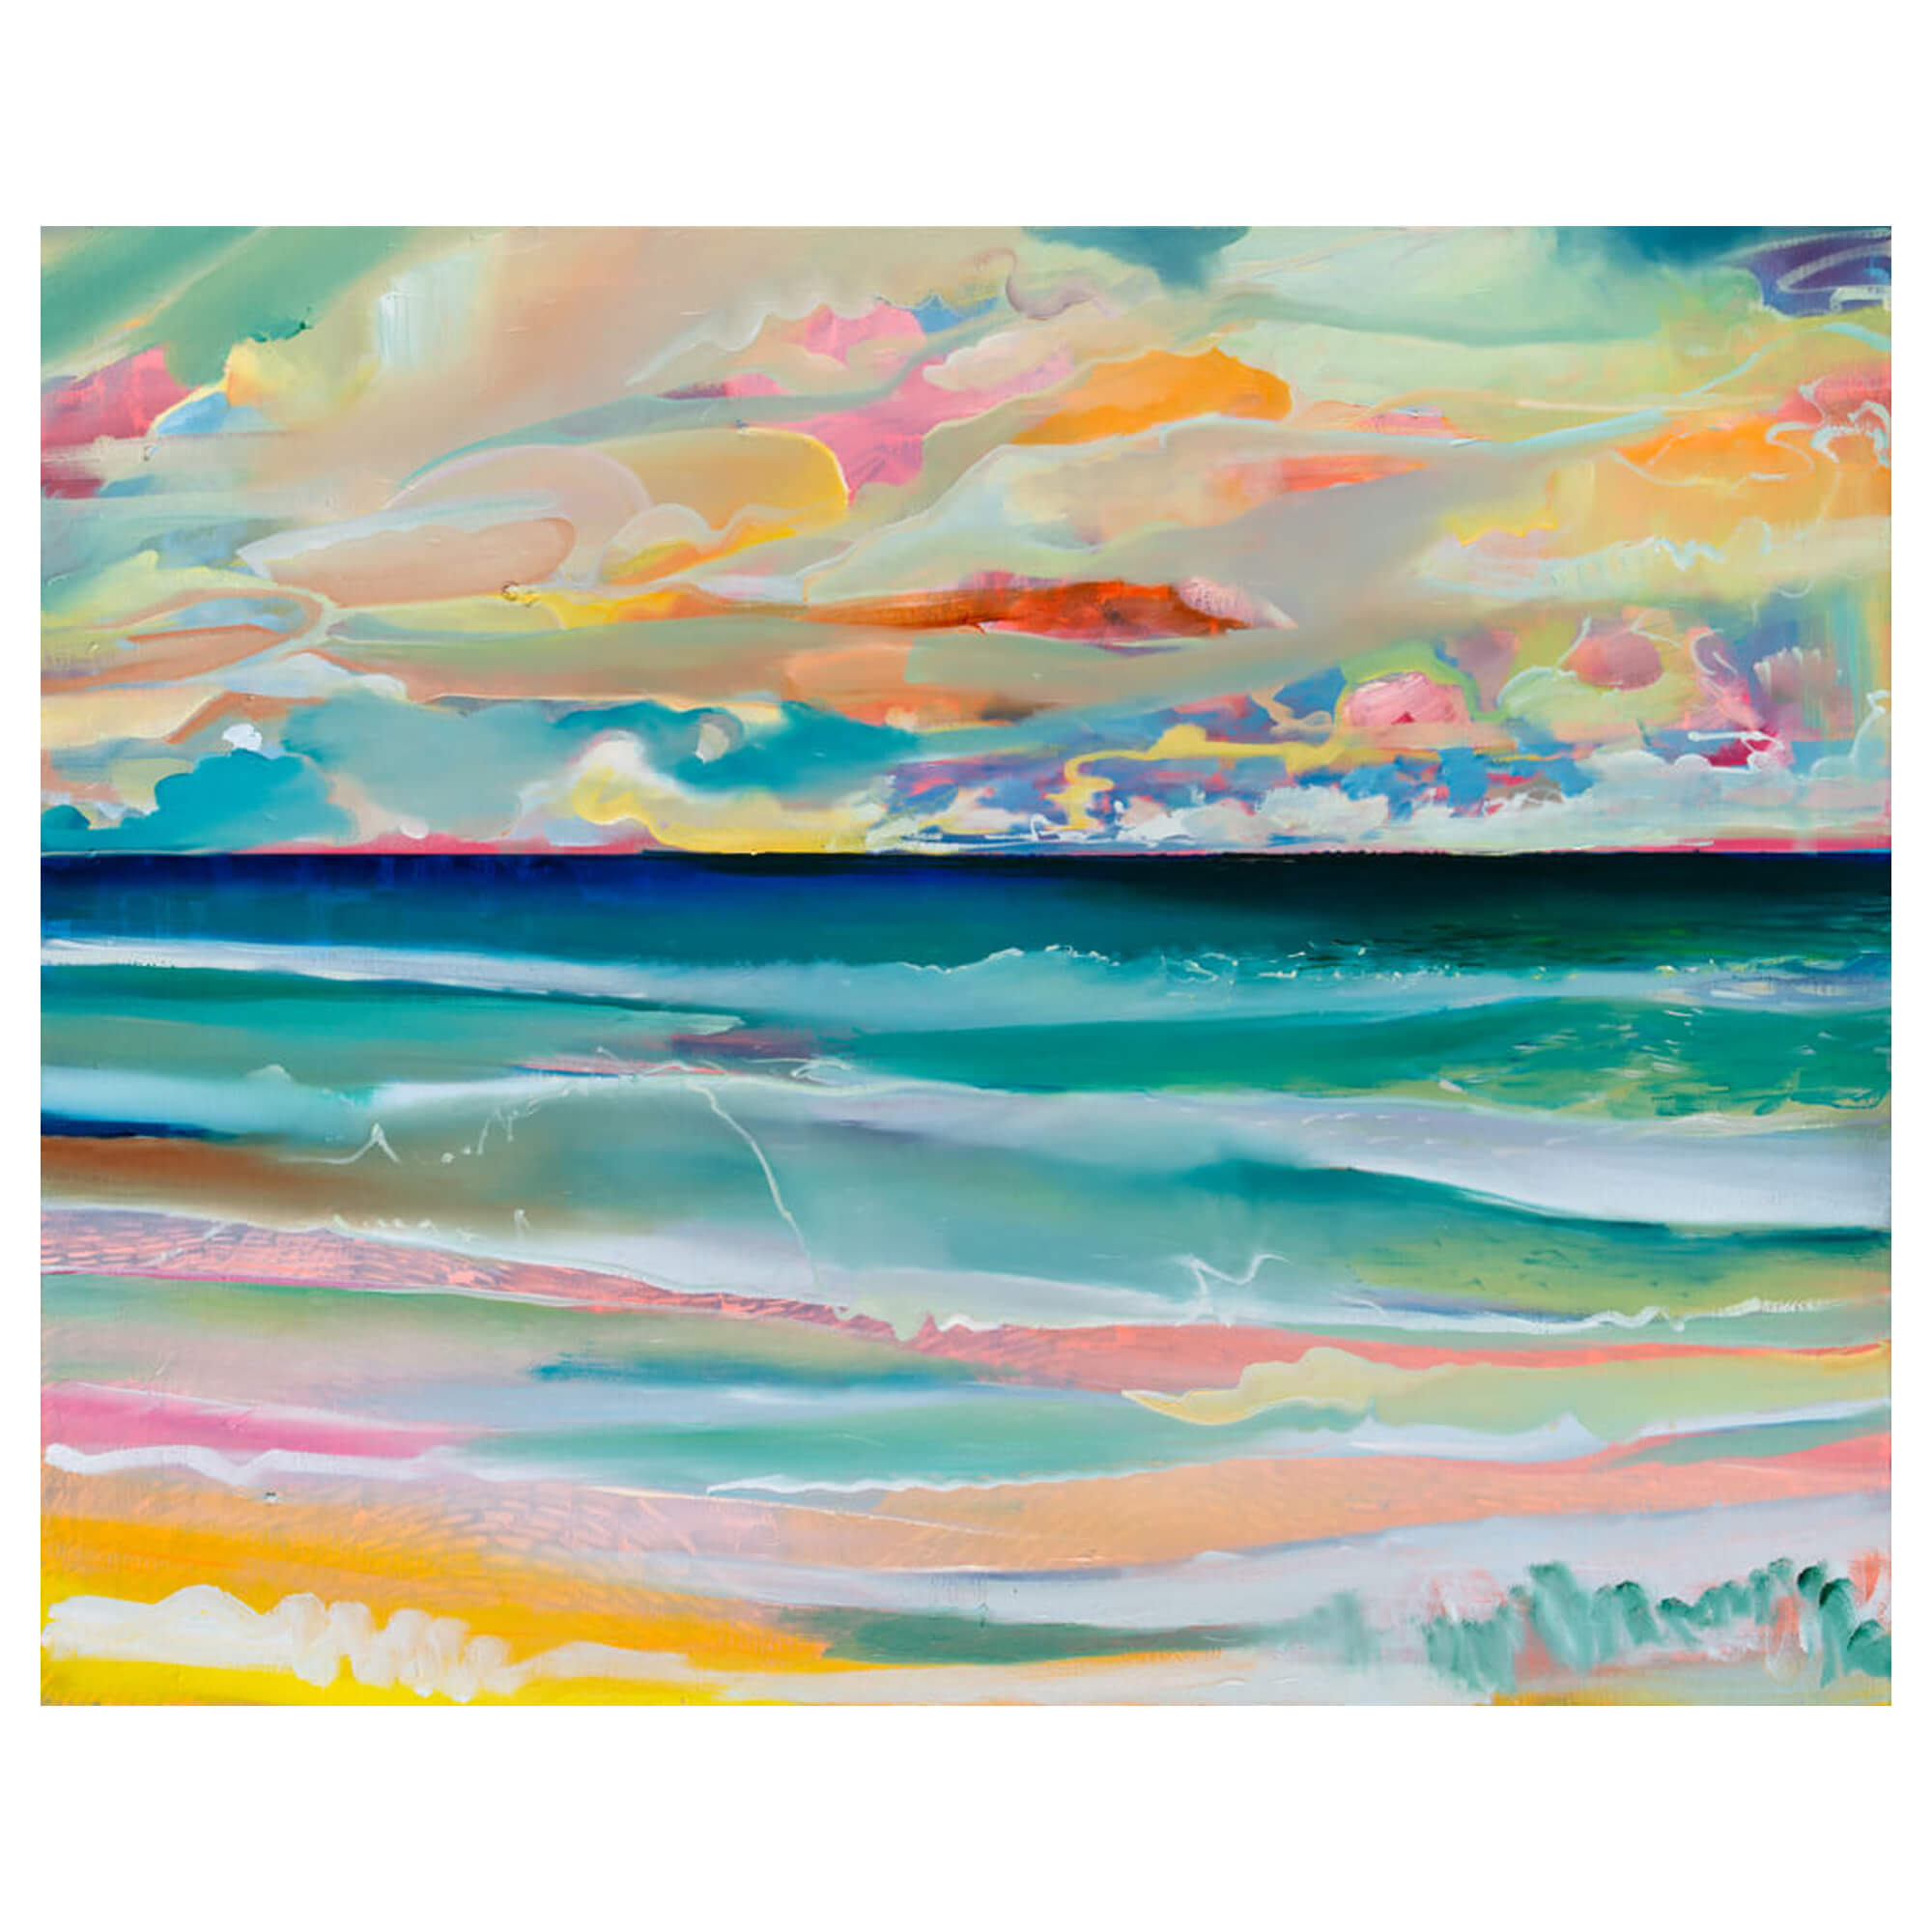 A matted art print of an abstract artwork of a seascape with pink, yellow and teal hues by Hawaii artist Saumolia Puapuaga 